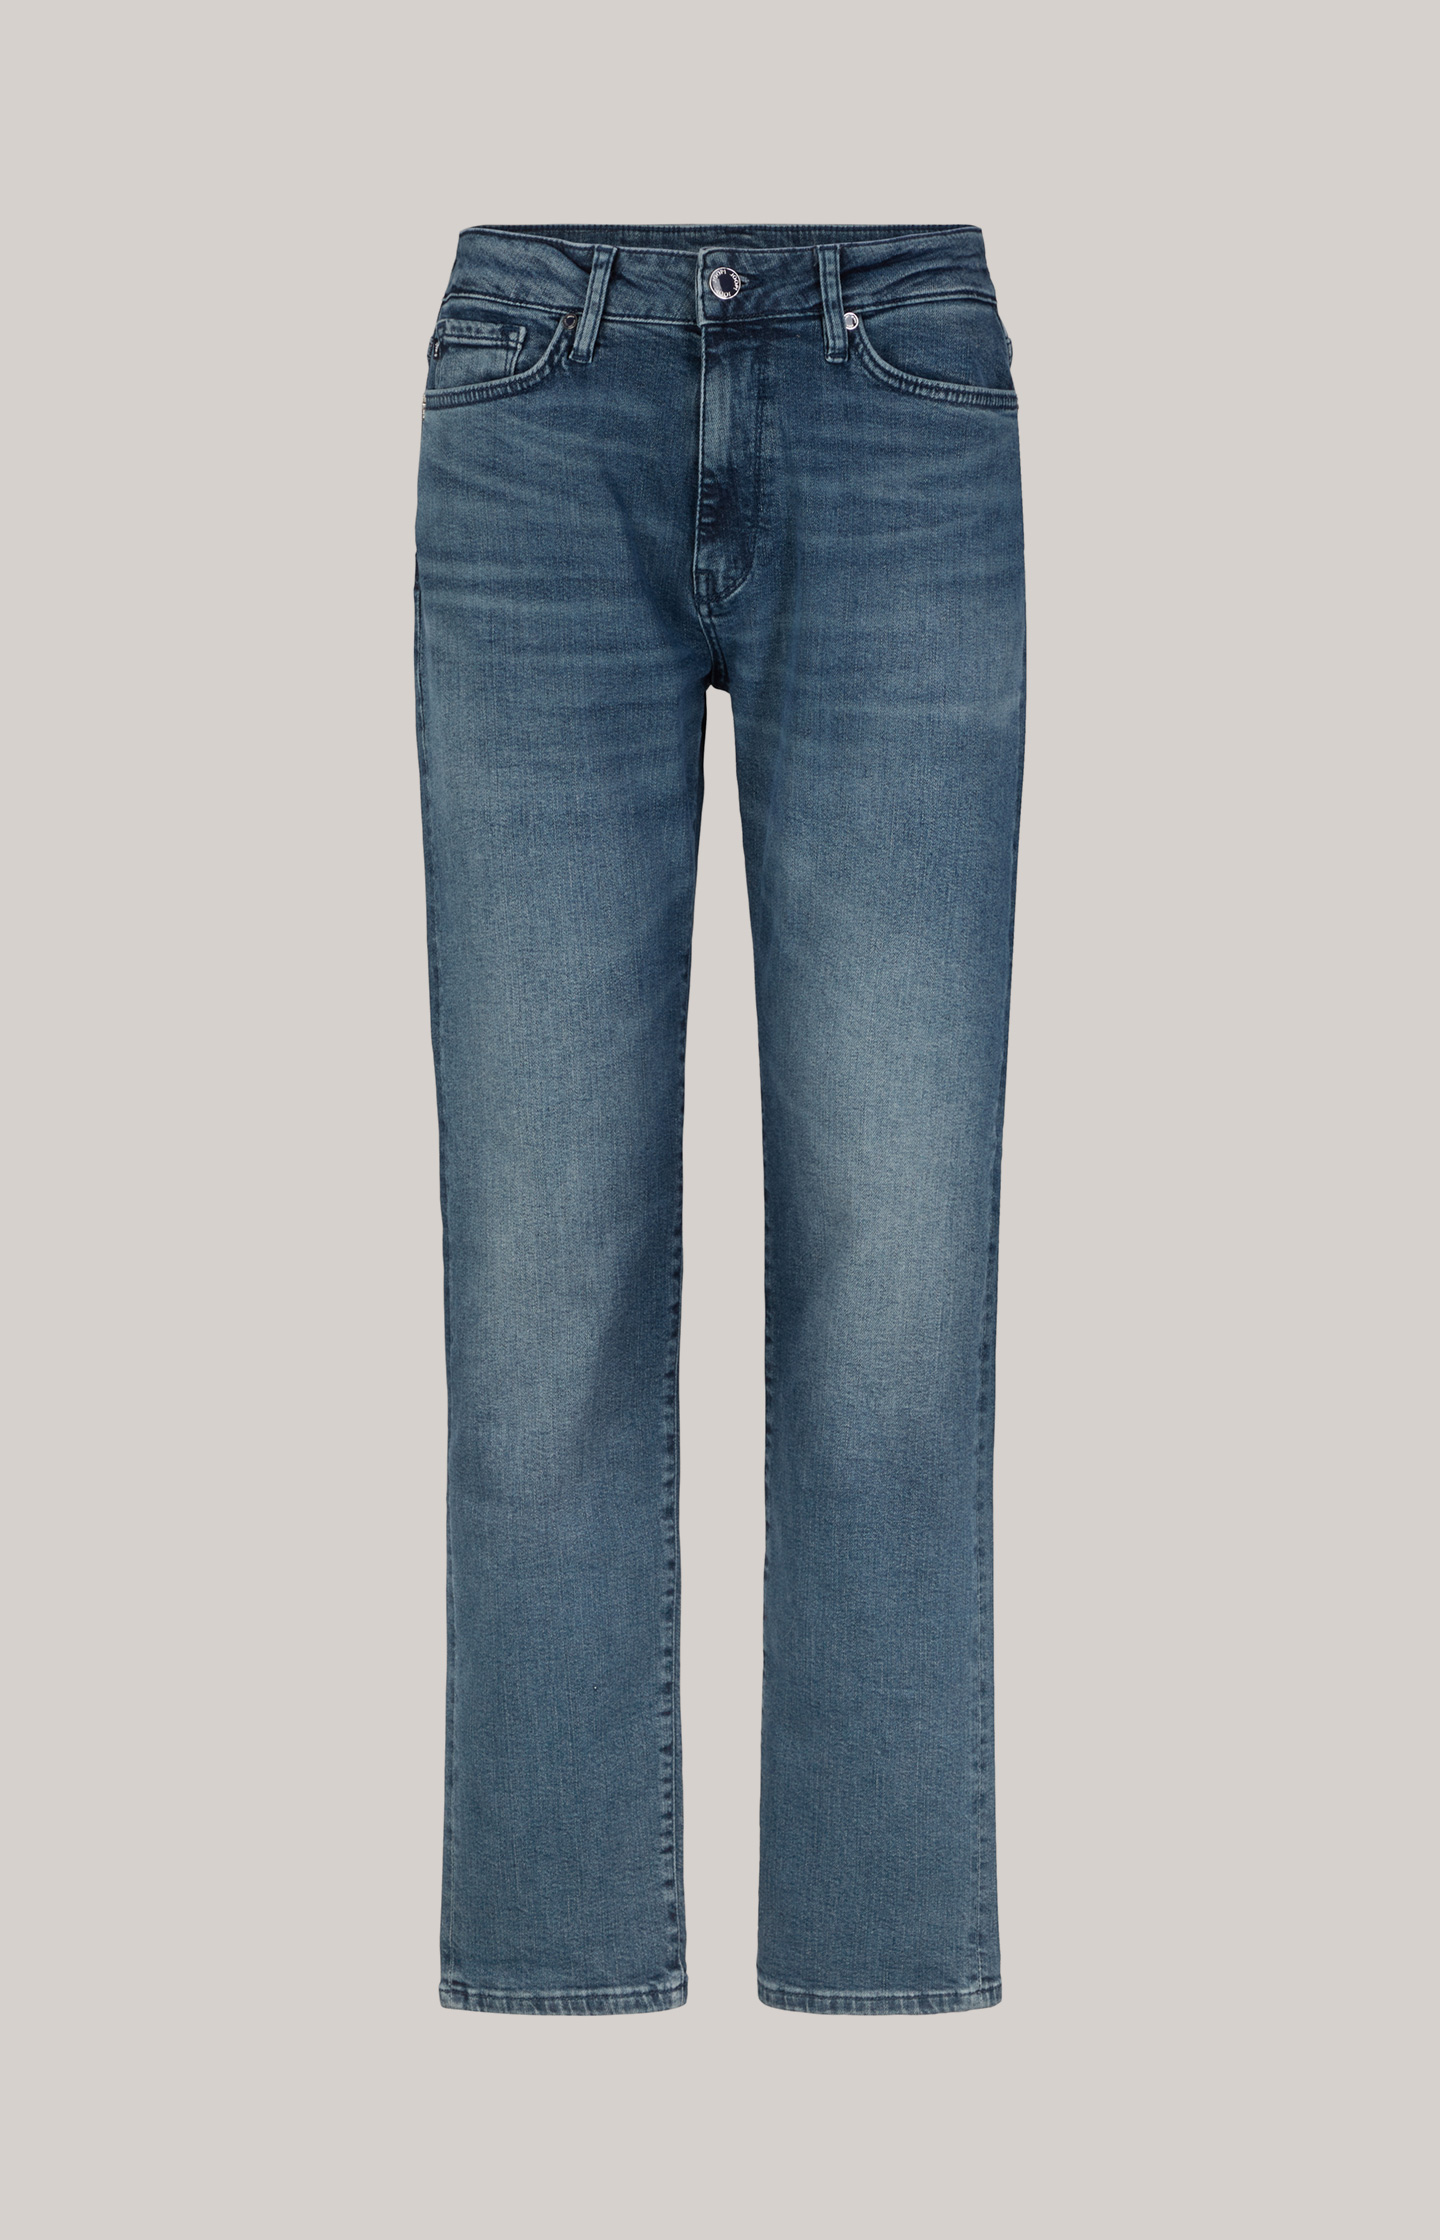 Shop - JOOP! Look Washed the Jeans a Online in in Denim Blue